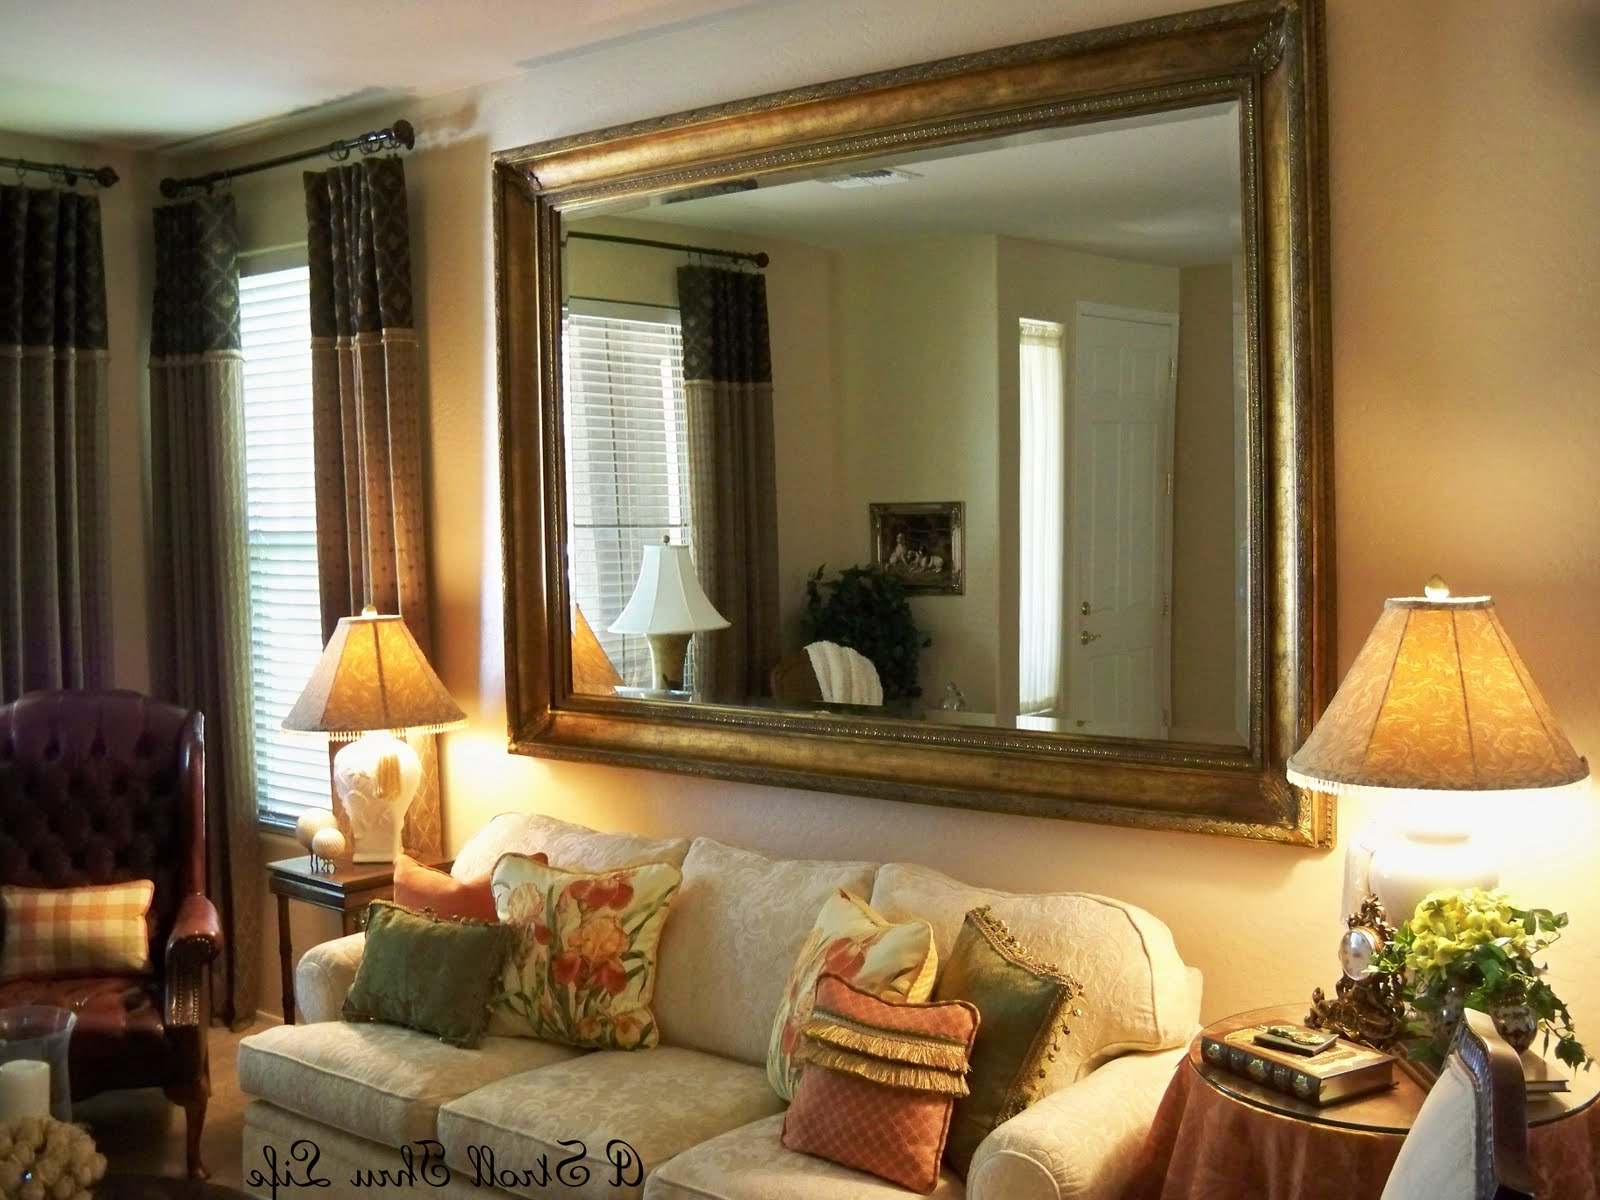 Decorating With Mirrors For Living Room Walls